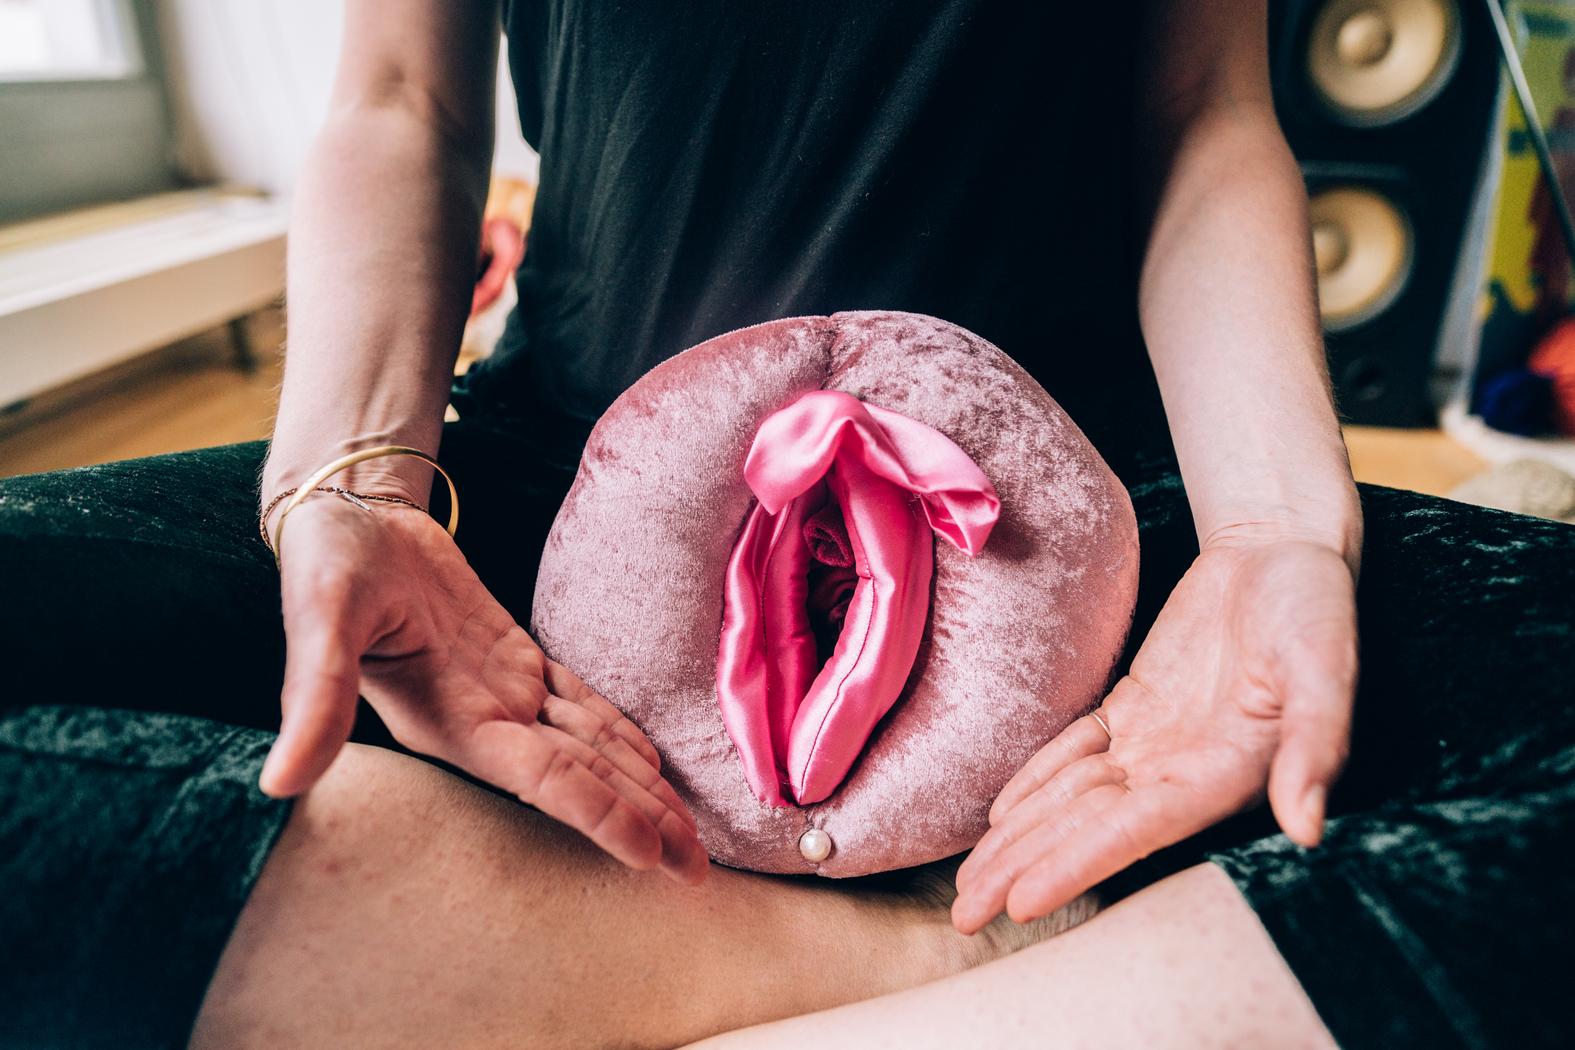 1575px x 1050px - I Stared at Strangers' Vaginas at a Vulva Watching Workshop ...